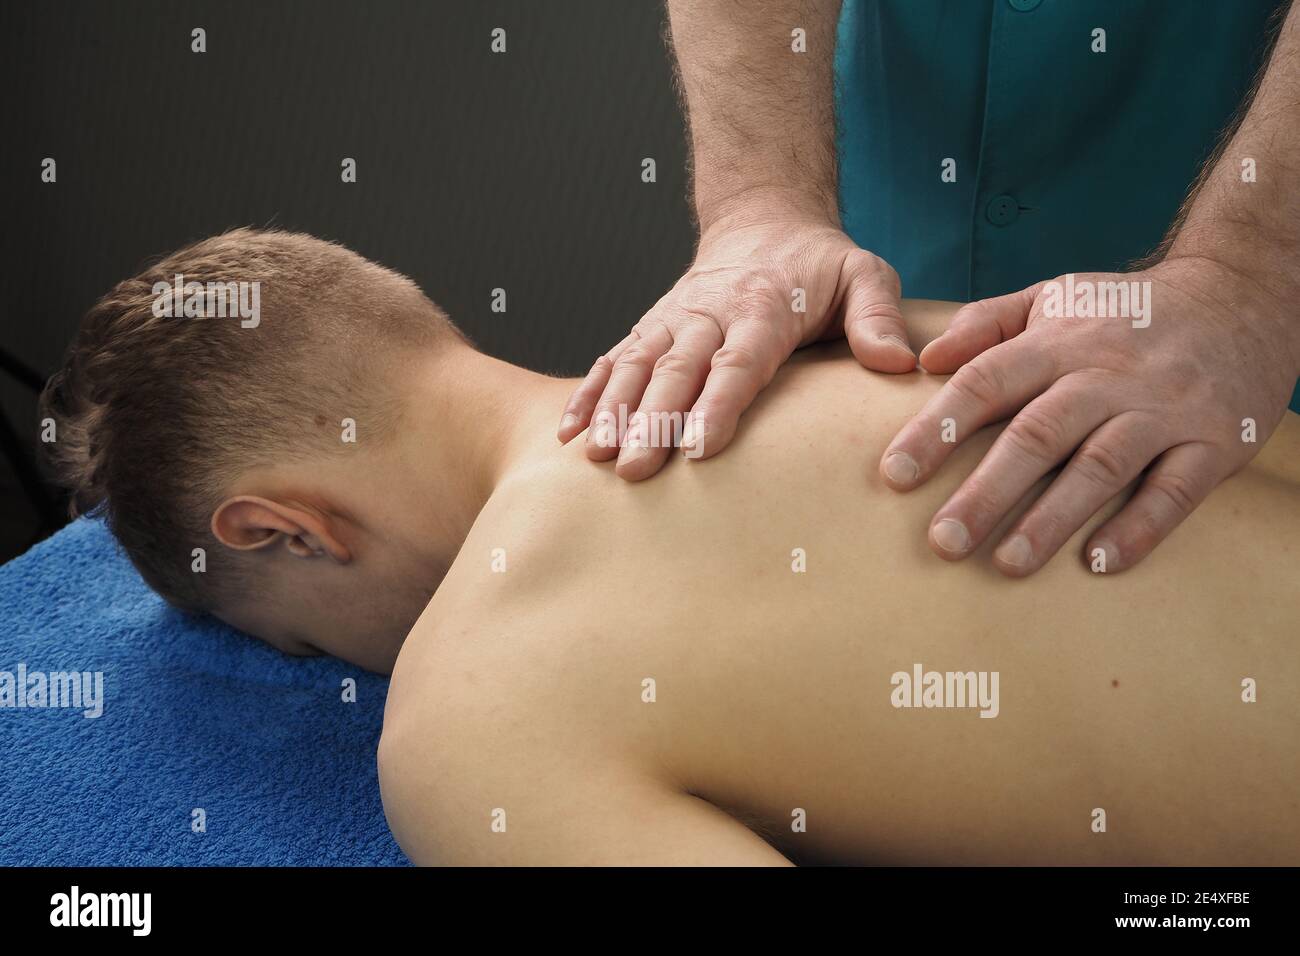 SPA and health. Manual back massage. A man on a massage couch